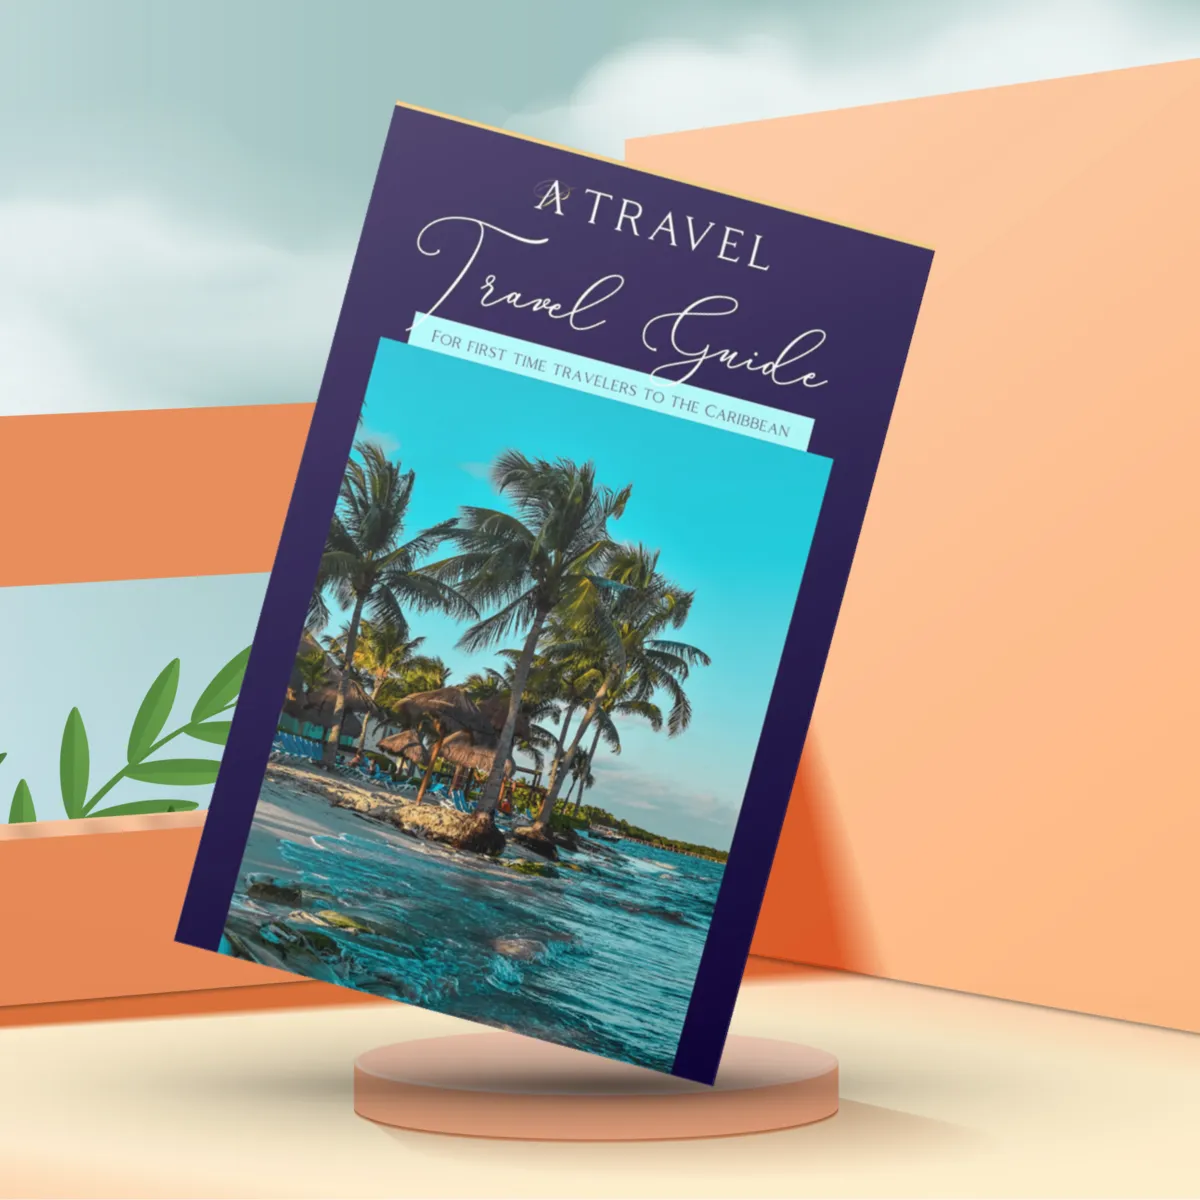 Travel Guide: First time travelers to the Caribbean